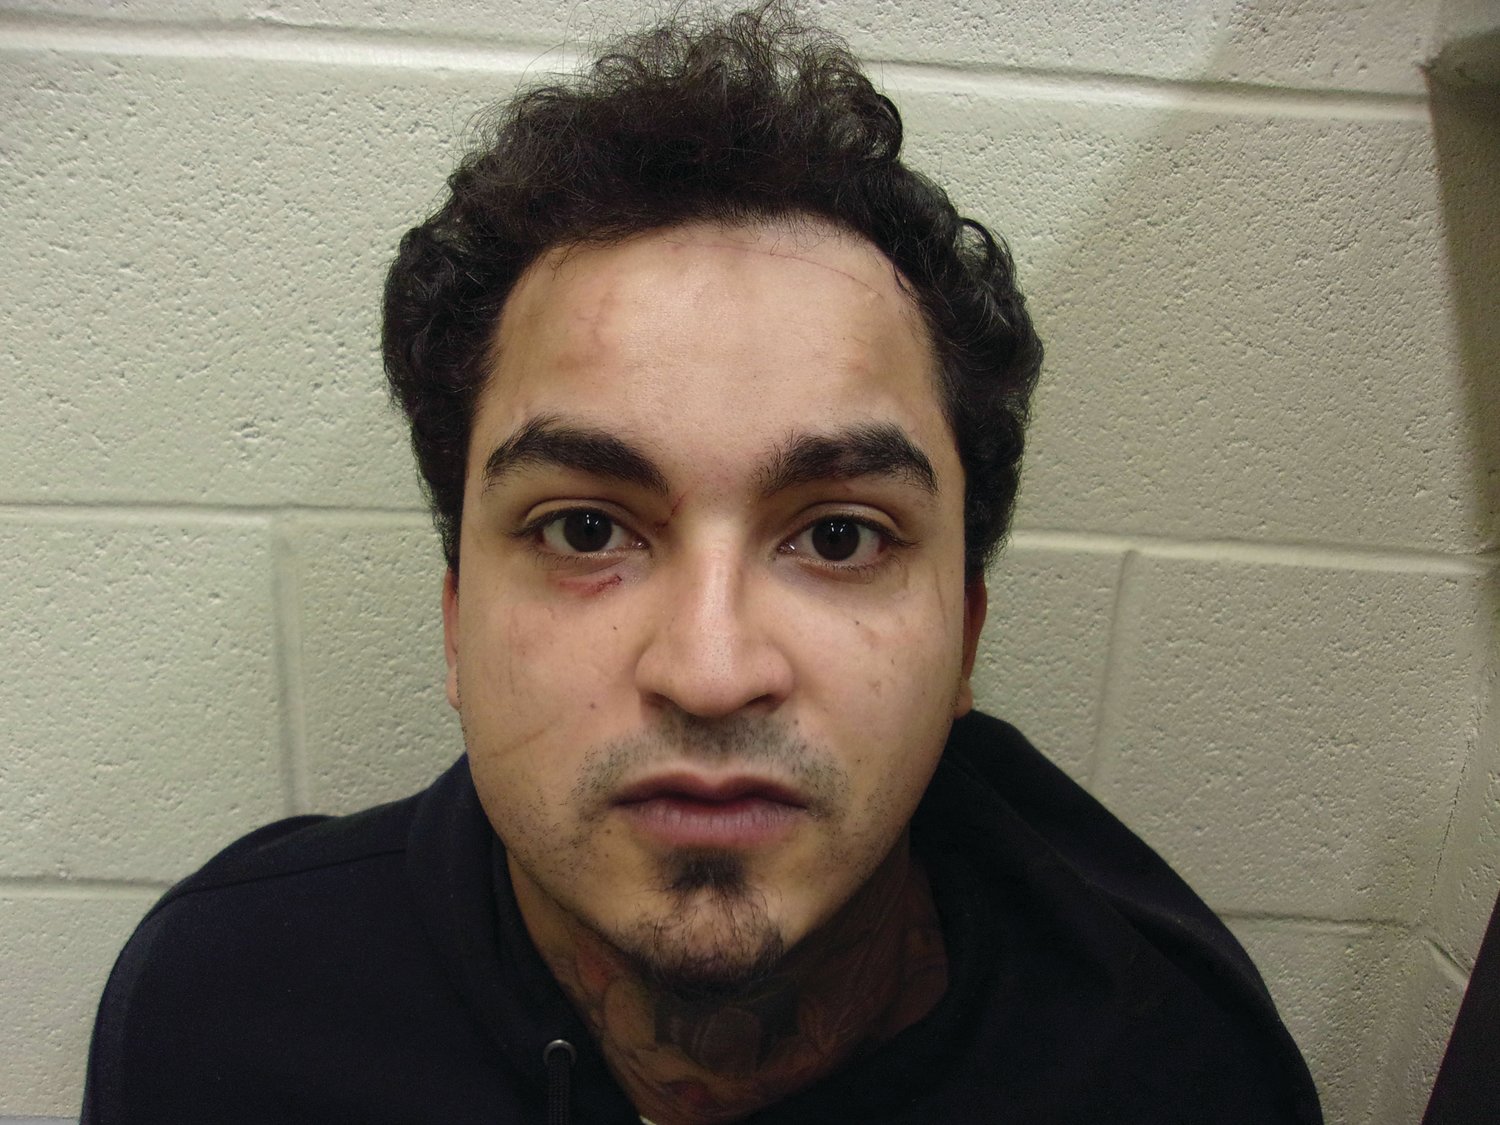 Aramis Segura, 30, of Charlestown, has been apprehended and charged in connection to a New Year’s Eve crash that claimed a 17-year-old’s life on New Year’s Eve. He has been charged with Leaving the Scene of an Accident Resulting in Death, Driving to Endanger-Resulting in Death, Obstruction of Justice, and Operating on a Suspended License.